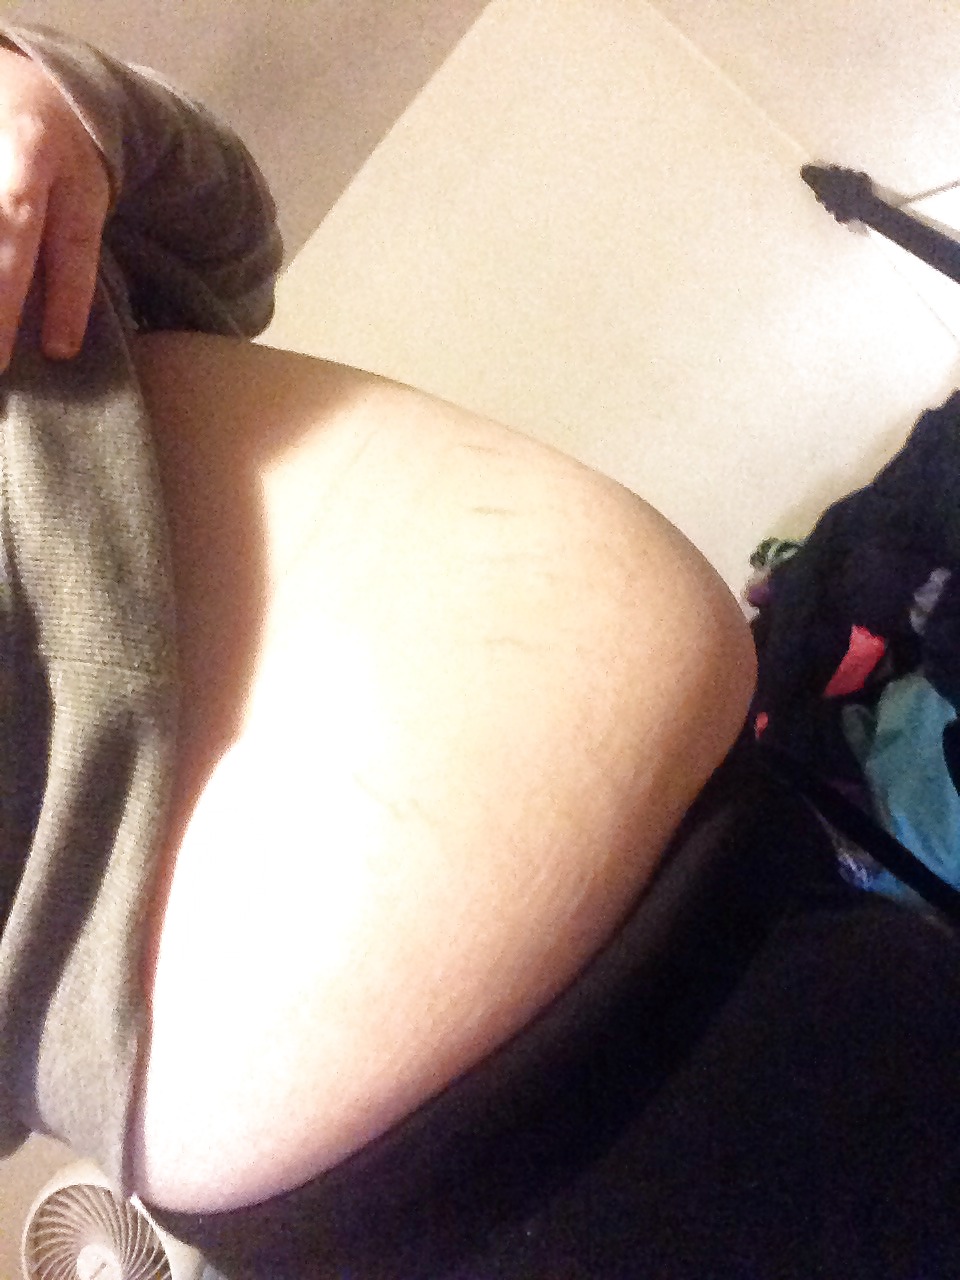 Huge food babies and weight gain 2 #22608876